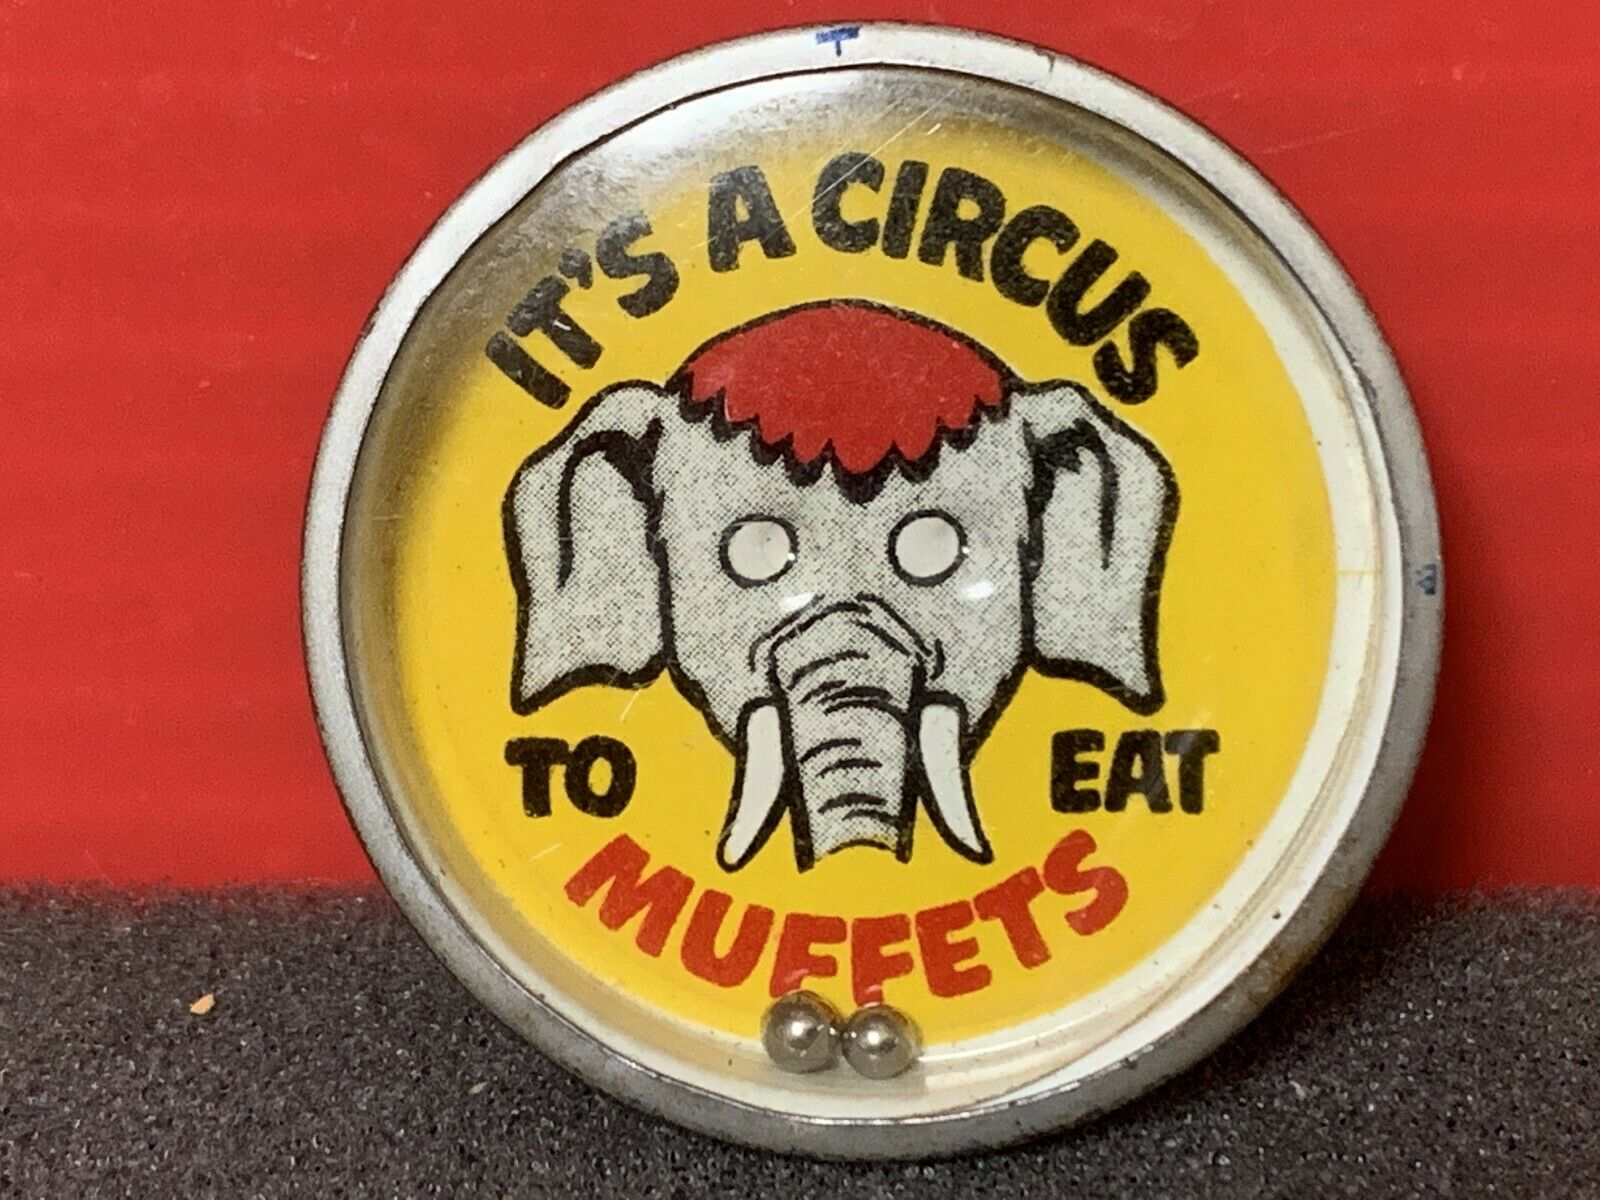 Vintage Muffets Cereal Elephant Dexterity Game "it's A Circus To Eat Muffets"